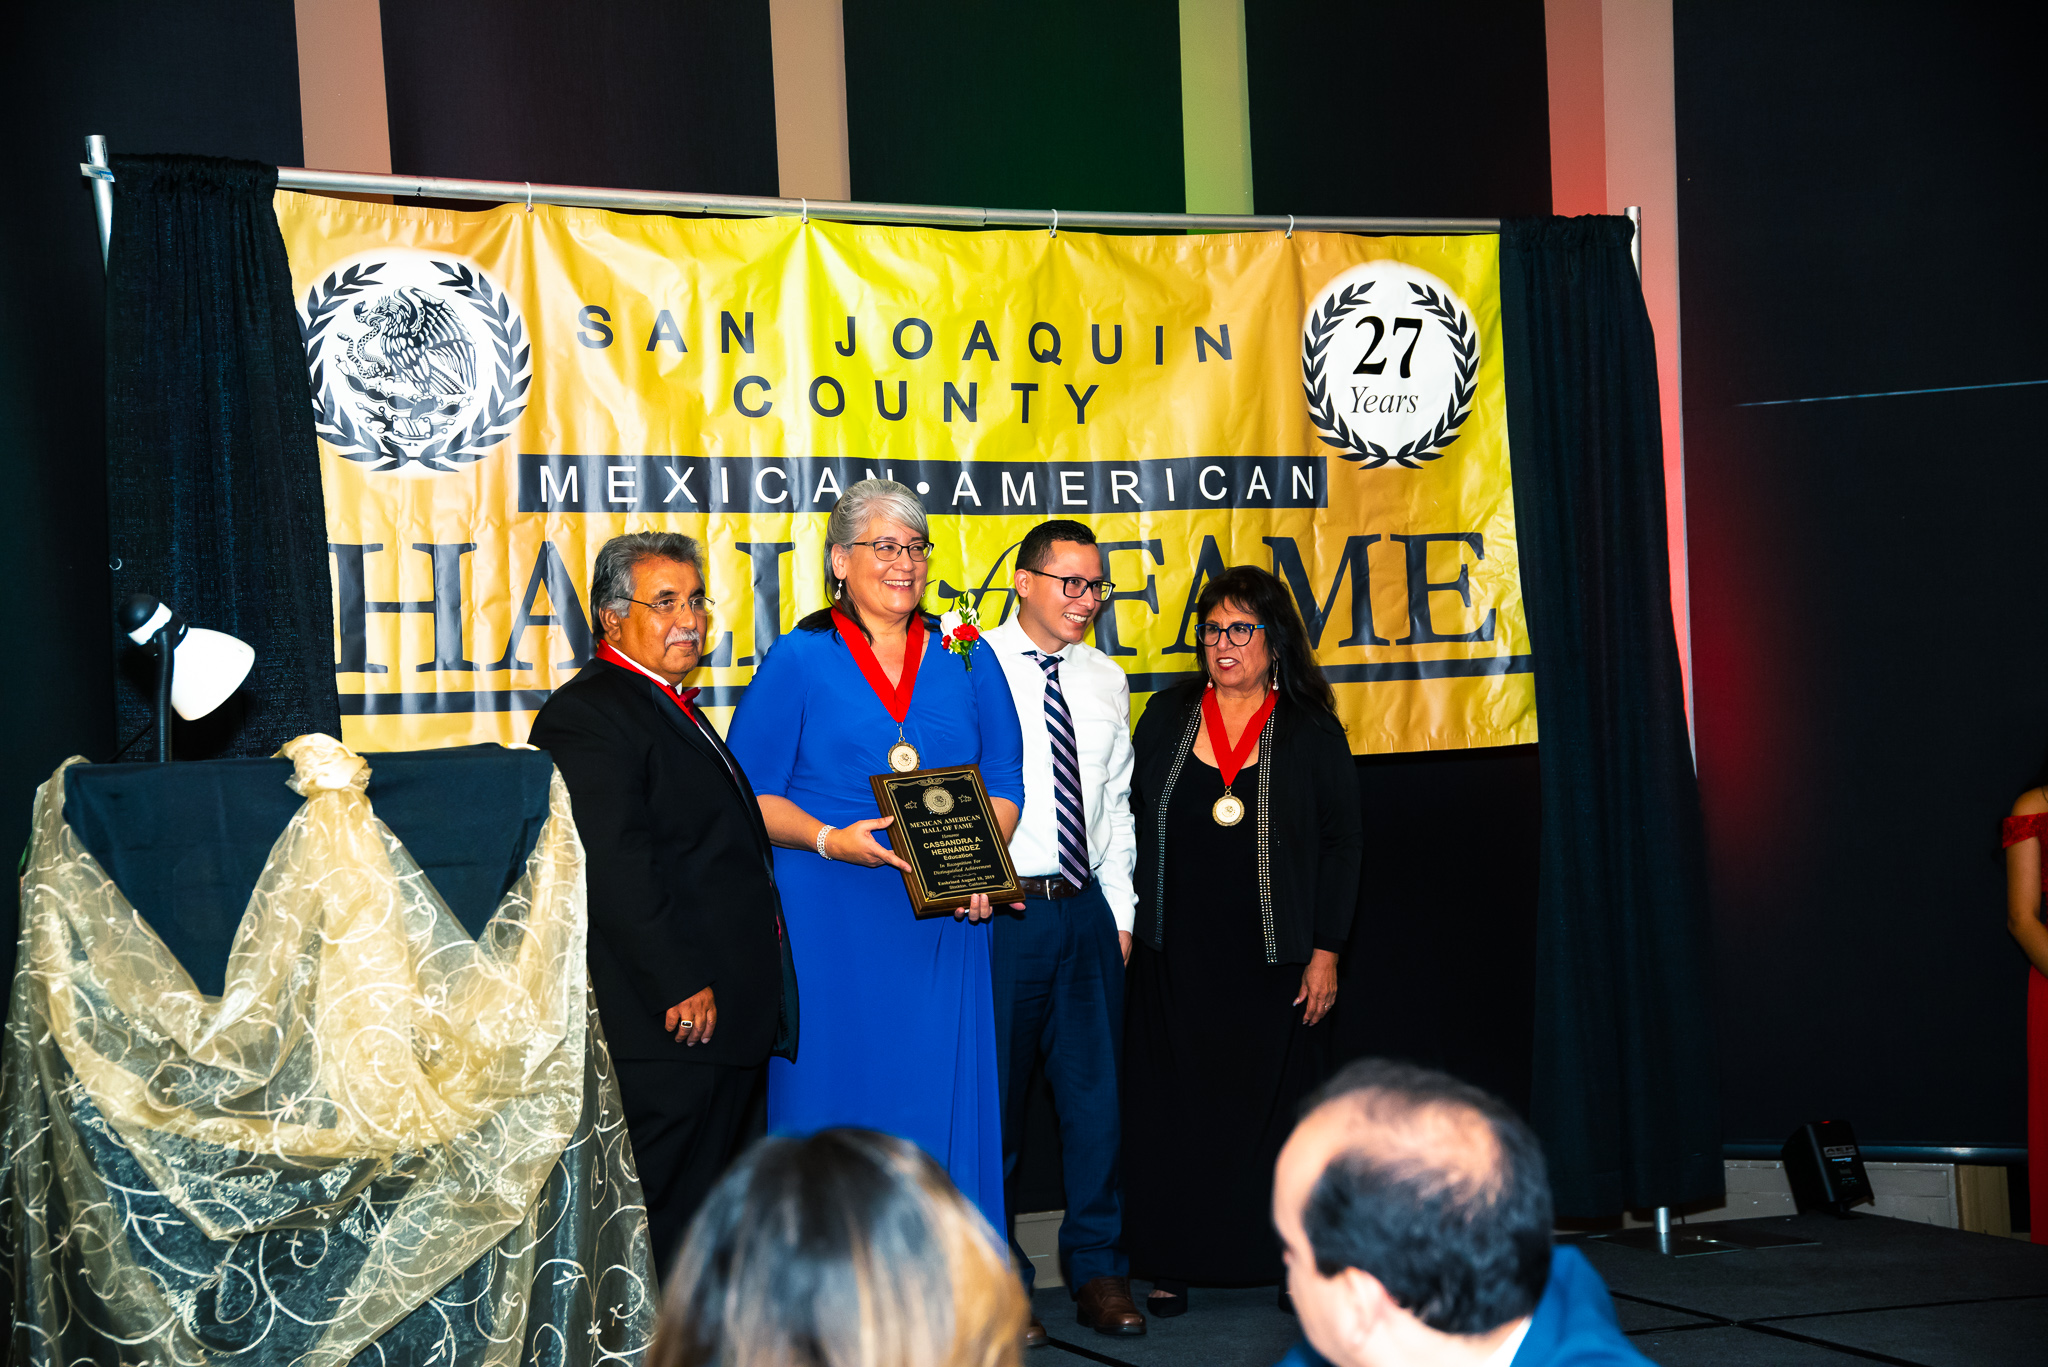 Cassandra Hernandez, second from left, is inducted into the San Joaquin County Mexican American Hall of Fame. Delta College Trustee Janet Rivera, far right, looks on.